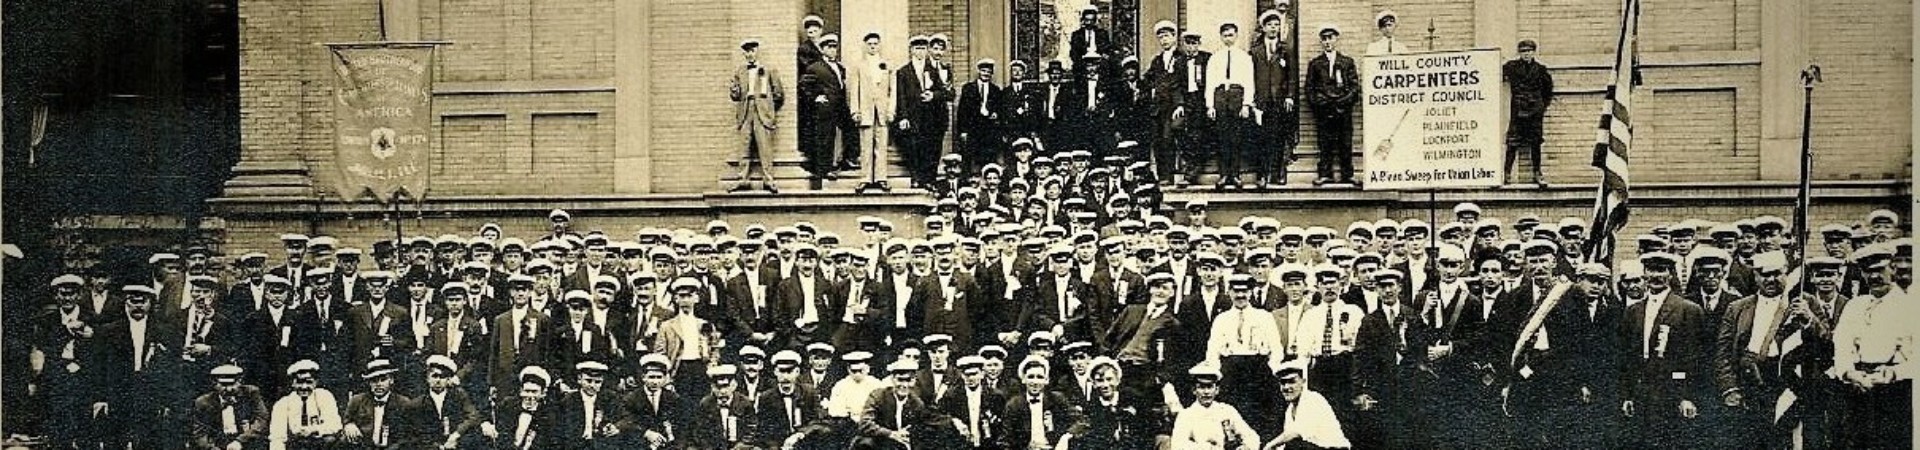 Historic photo of Will County carpenters